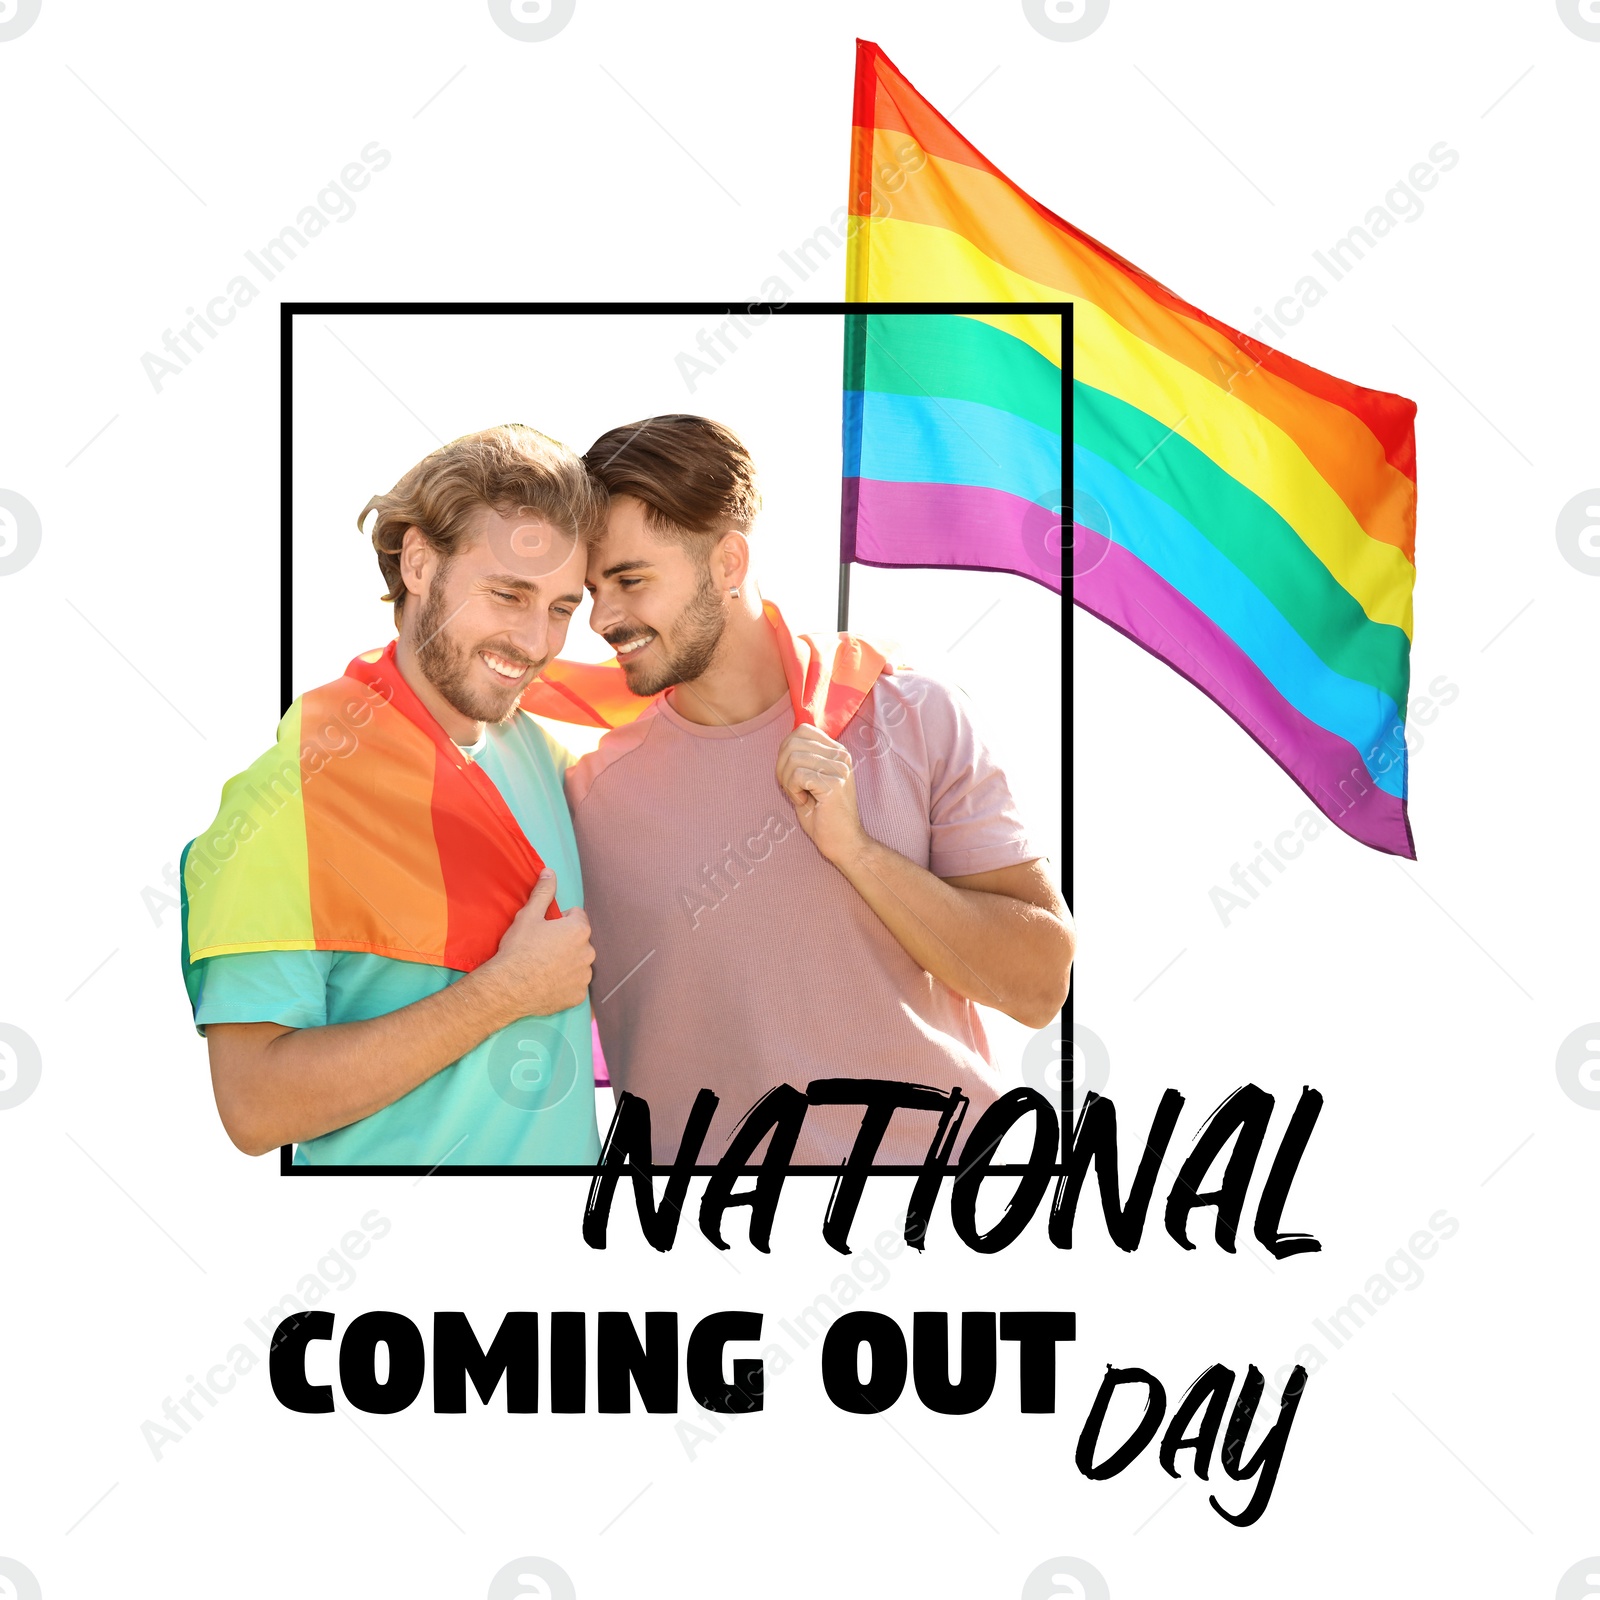 Image of National Coming Out day. Happy gay couple with rainbow pride flags on white background